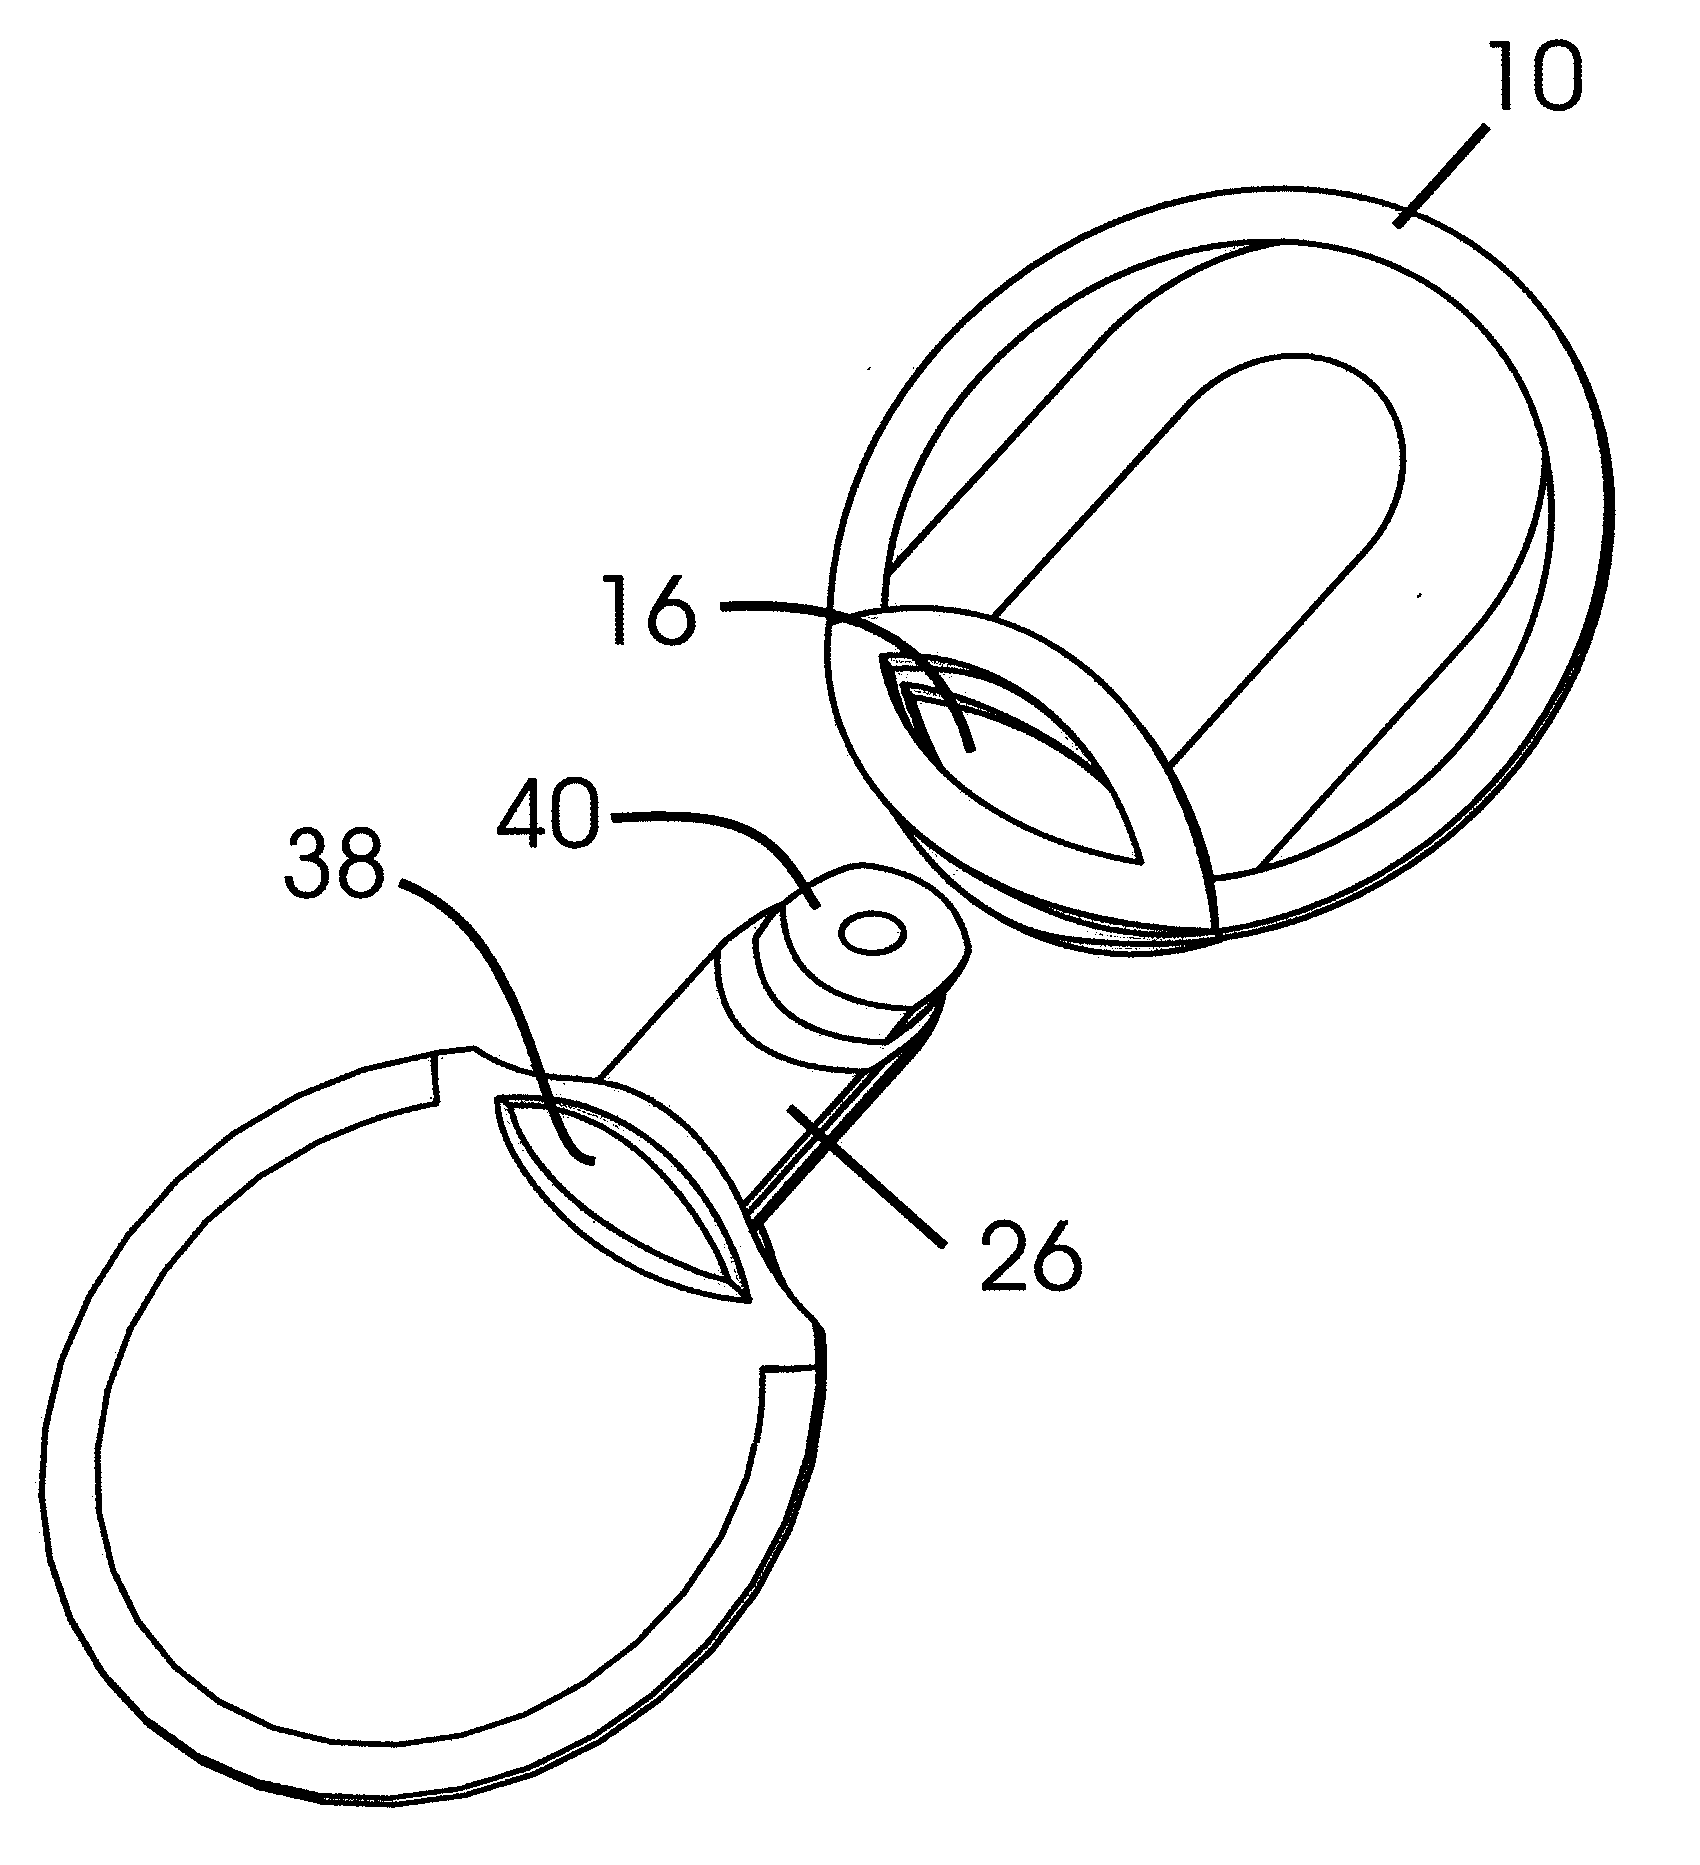 Dispenser and applicator that bring reactive substances into contact with each other at time of use